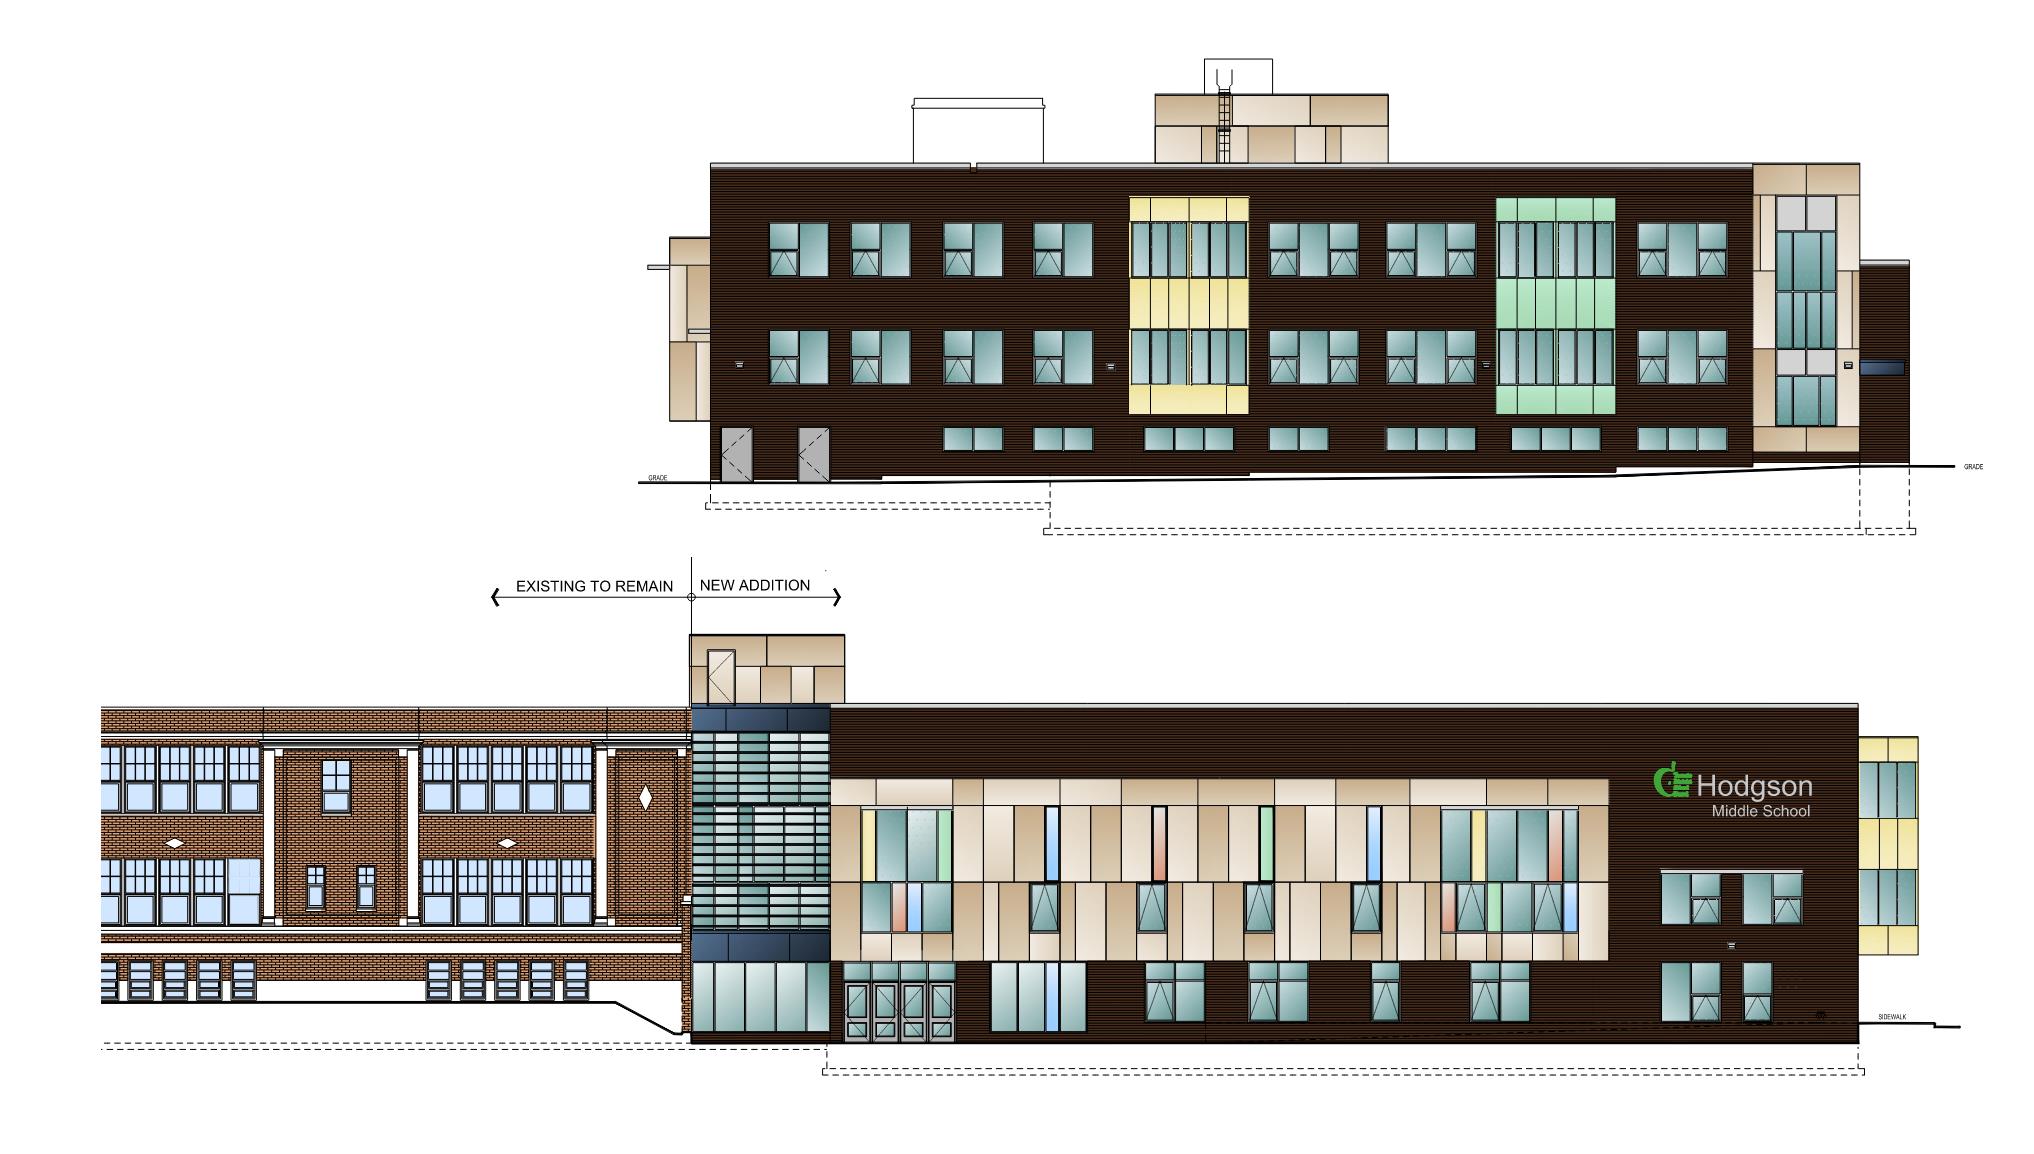 Elevation plan. Elevation at the top is depicting the east elevation of the school and the elevation at the bottom is depicting the south elevation. Open Gallery